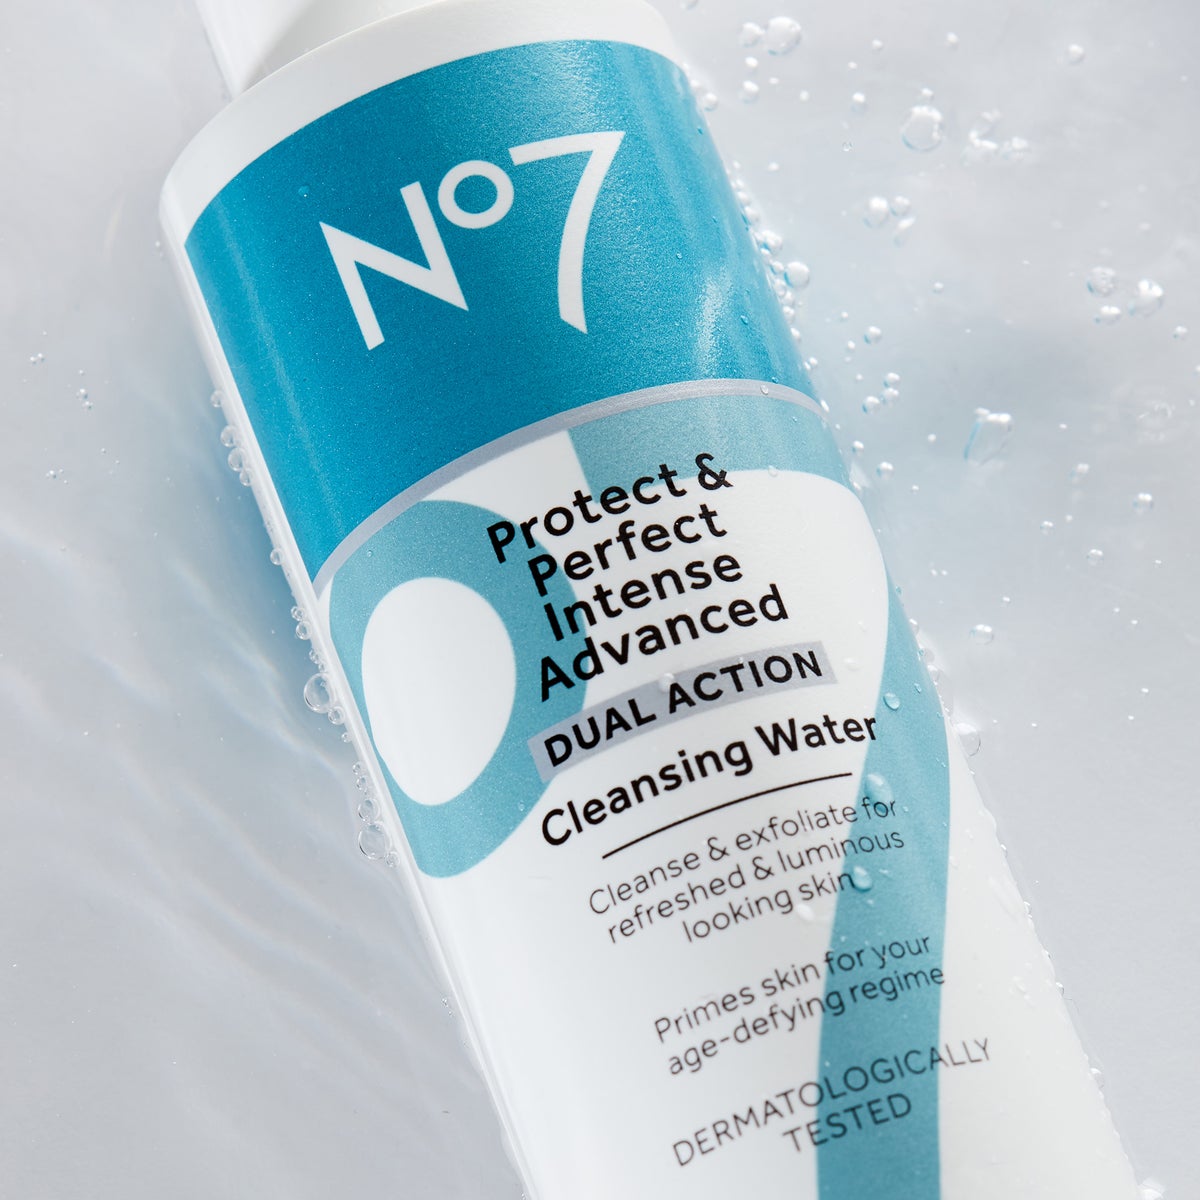 No7 Protect & Perfect Intense Skincare System